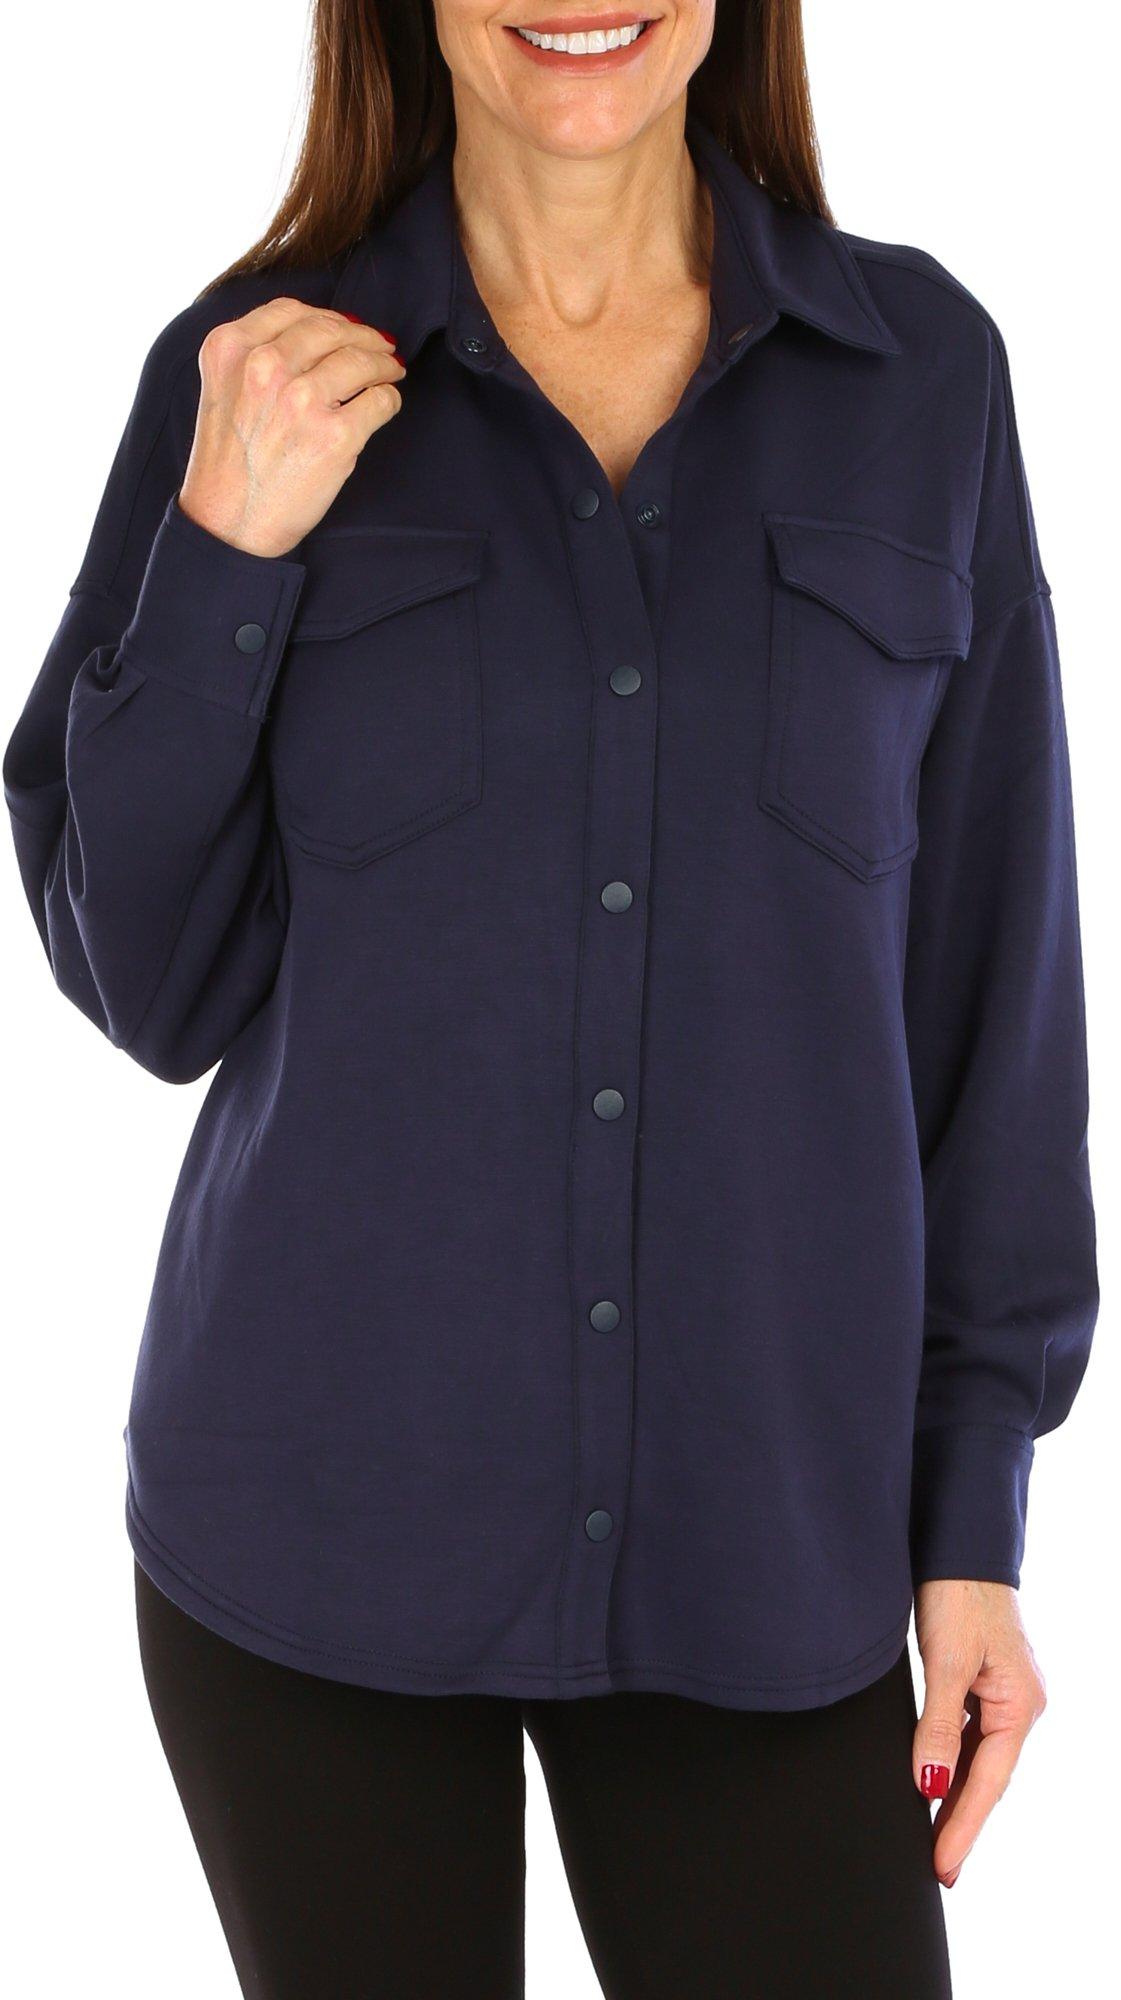 Women's Active Solid Button Down Top